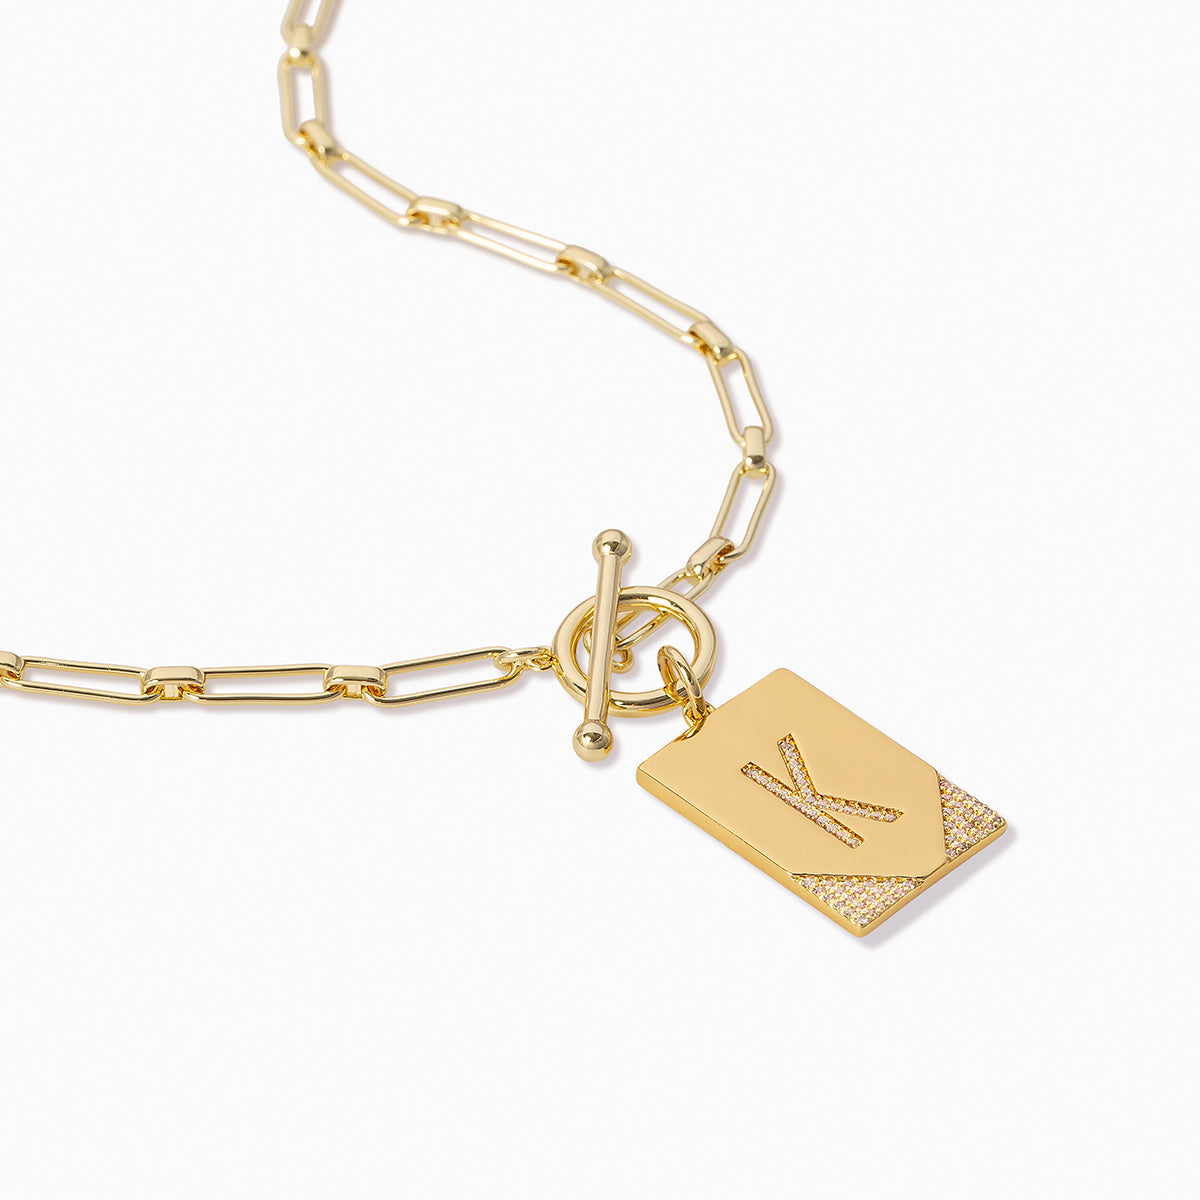 Leave Your Mark Chain Necklace | Gold A Gold B Gold C Gold D Gold E Gold G Gold H Gold J Gold K Gold L Gold M Gold N Gold P Gold R Gold S Gold T Gold V | Product Detail Image | Uncommon James